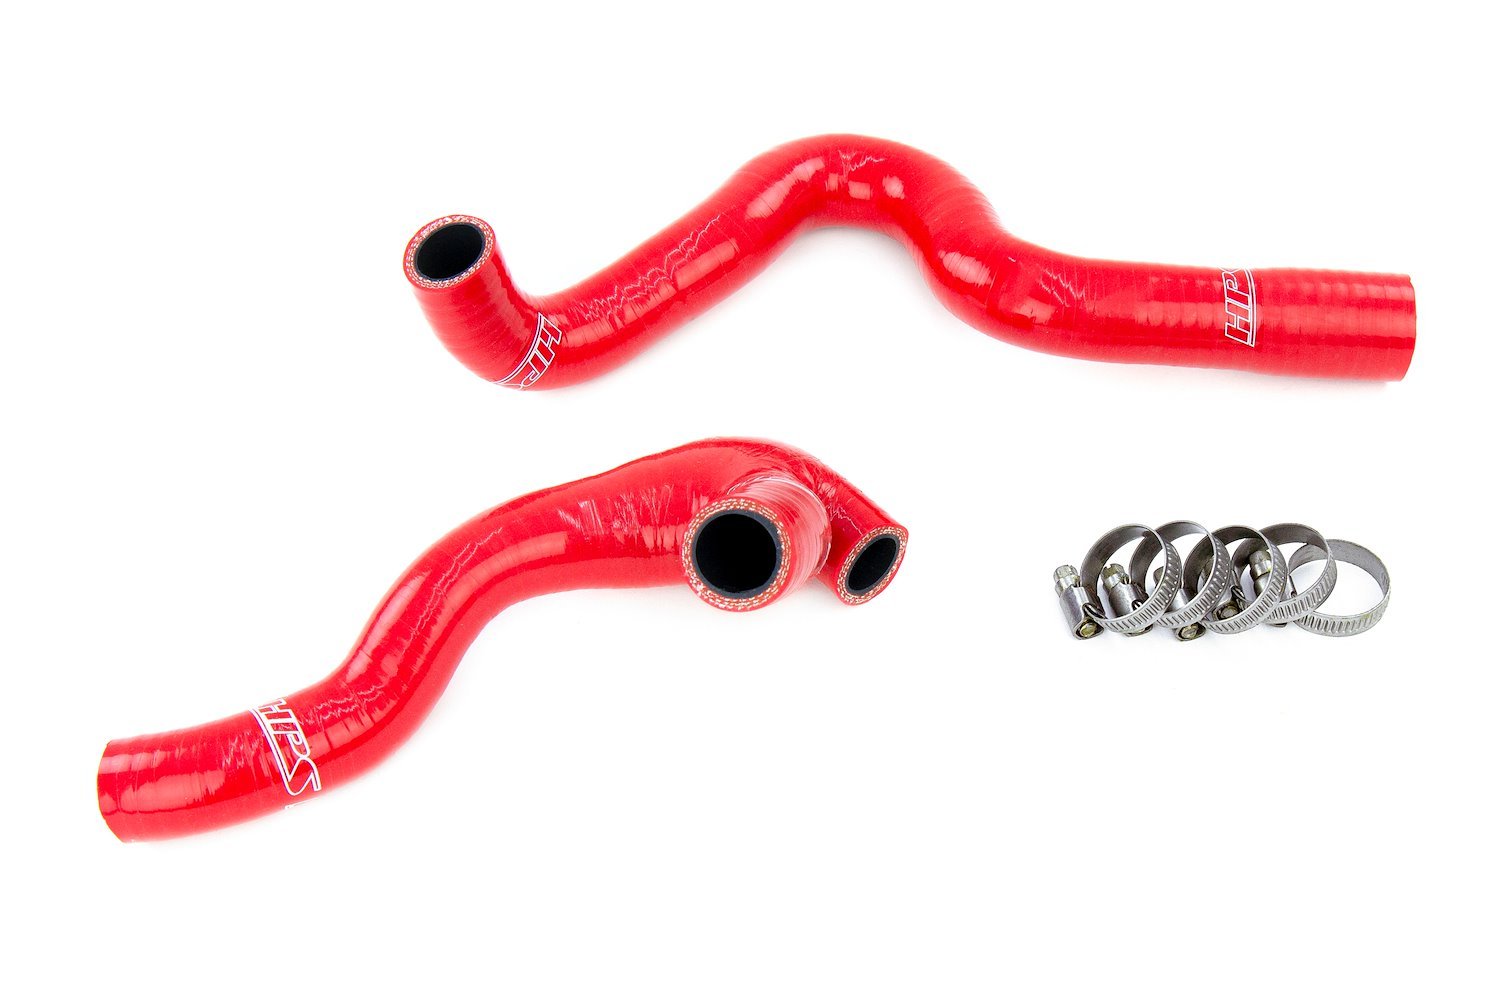 57-1934-RED Breather & BPV Hose Kit, Reinforced Fluorolined Silicone, Replaces Rubber Breather & Bypass Valve Hoses